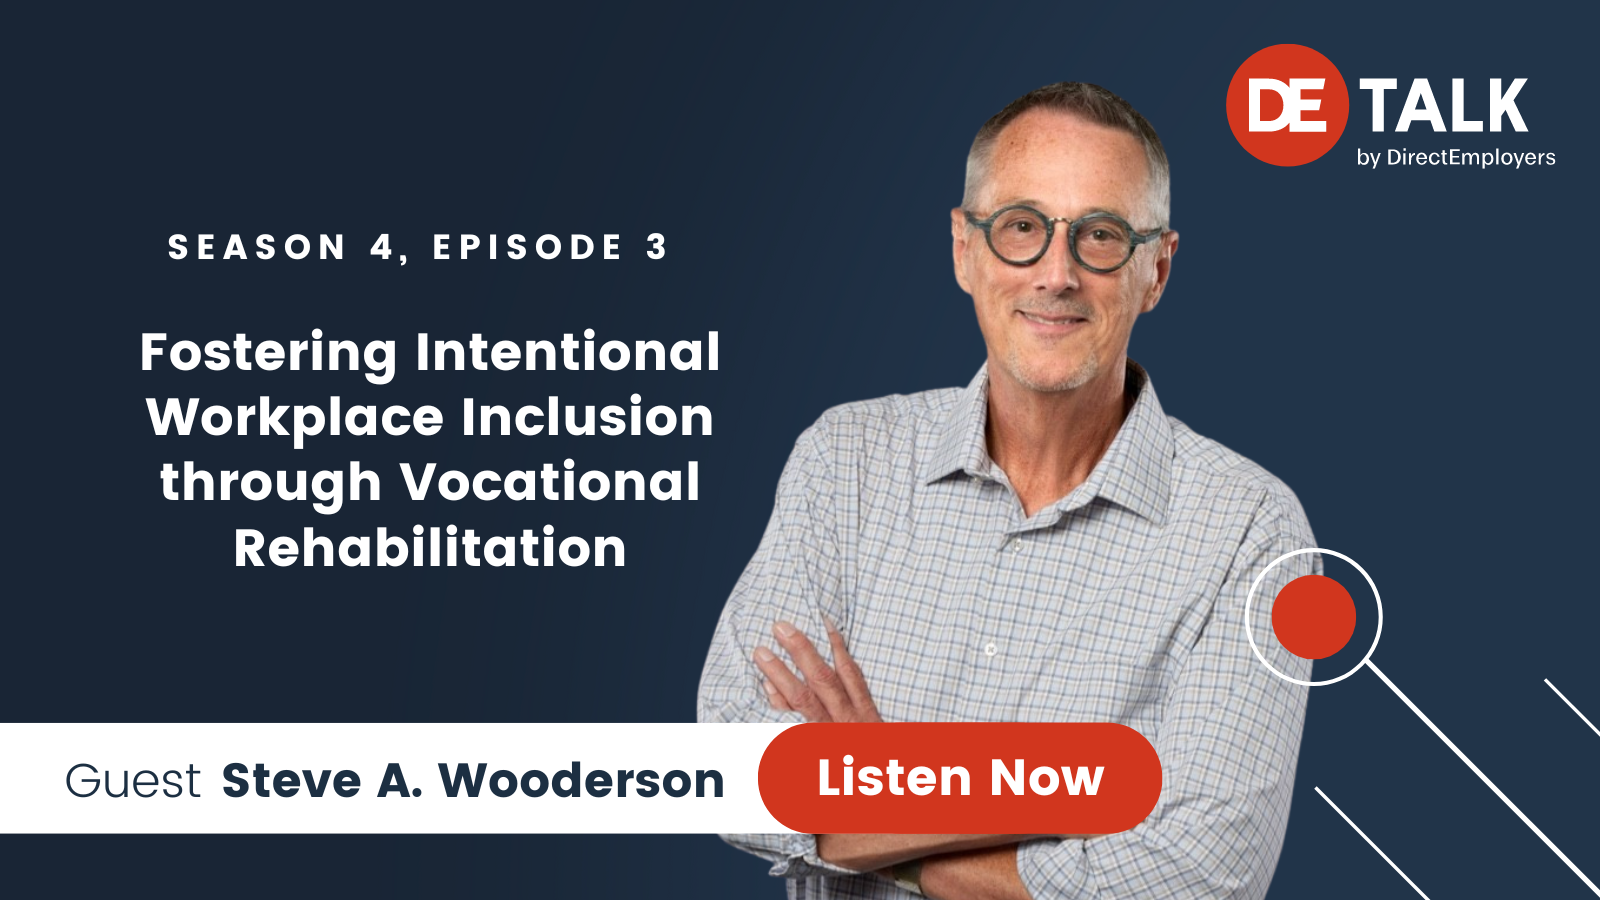 Fostering Intentional Workplace Inclusion through Vocational Rehabilitation Discussed in New DE Talk Podcast